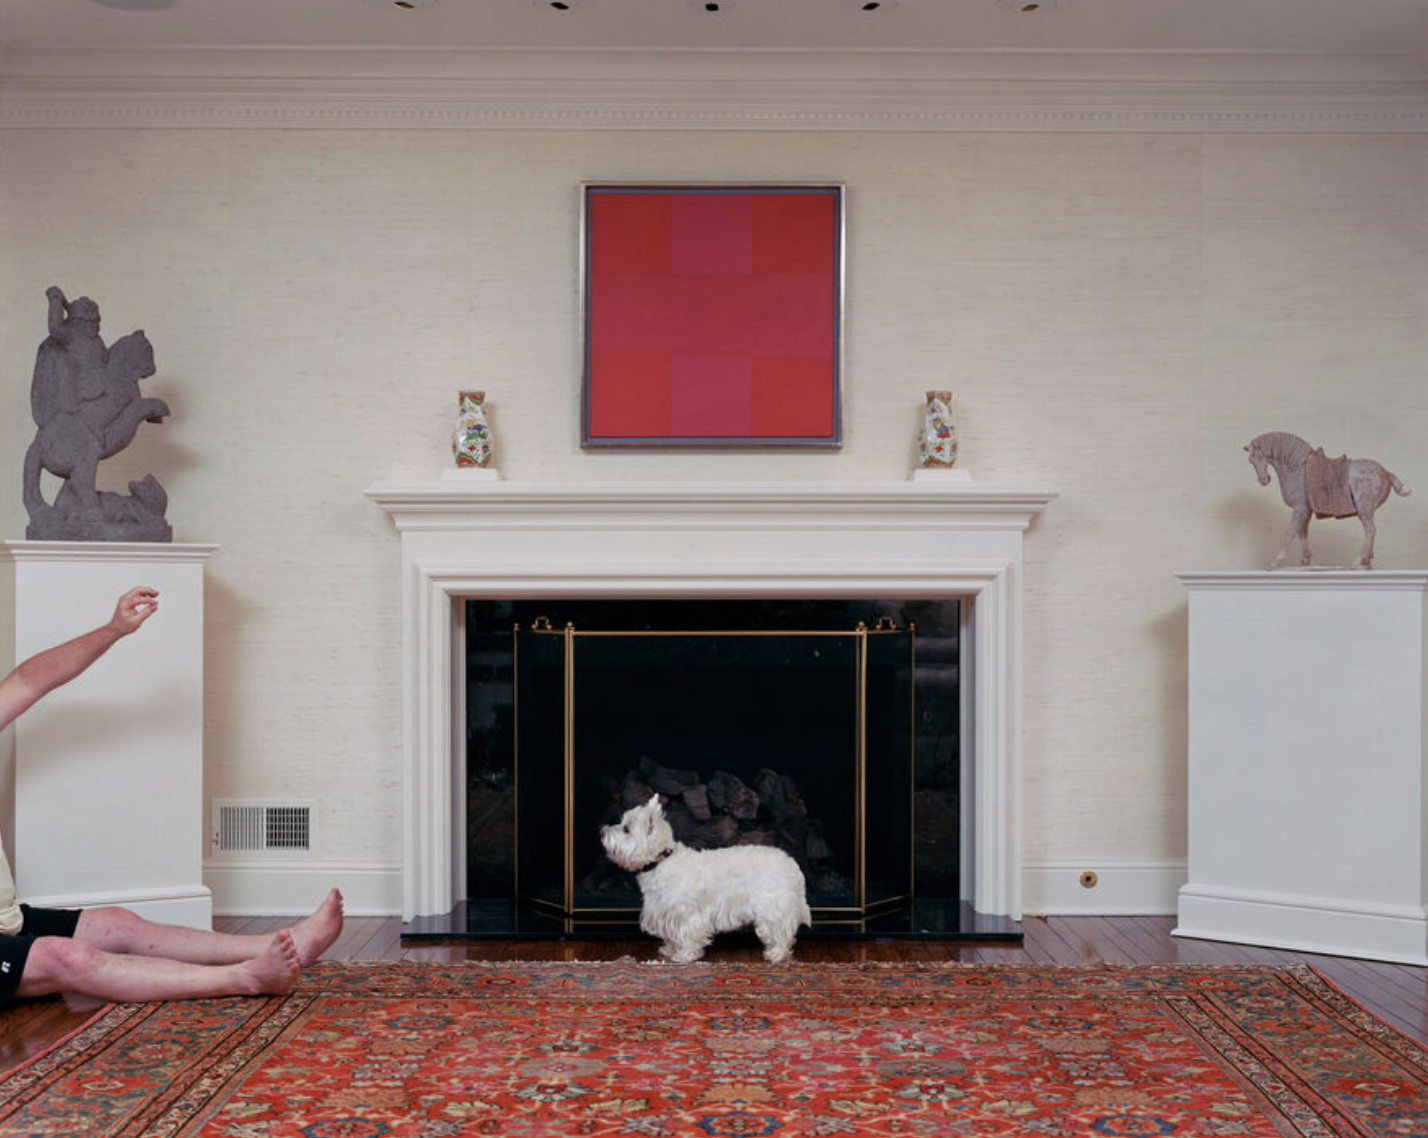 Small white dog stands in front of a fireplace as a person on the left side holds a treat in the air